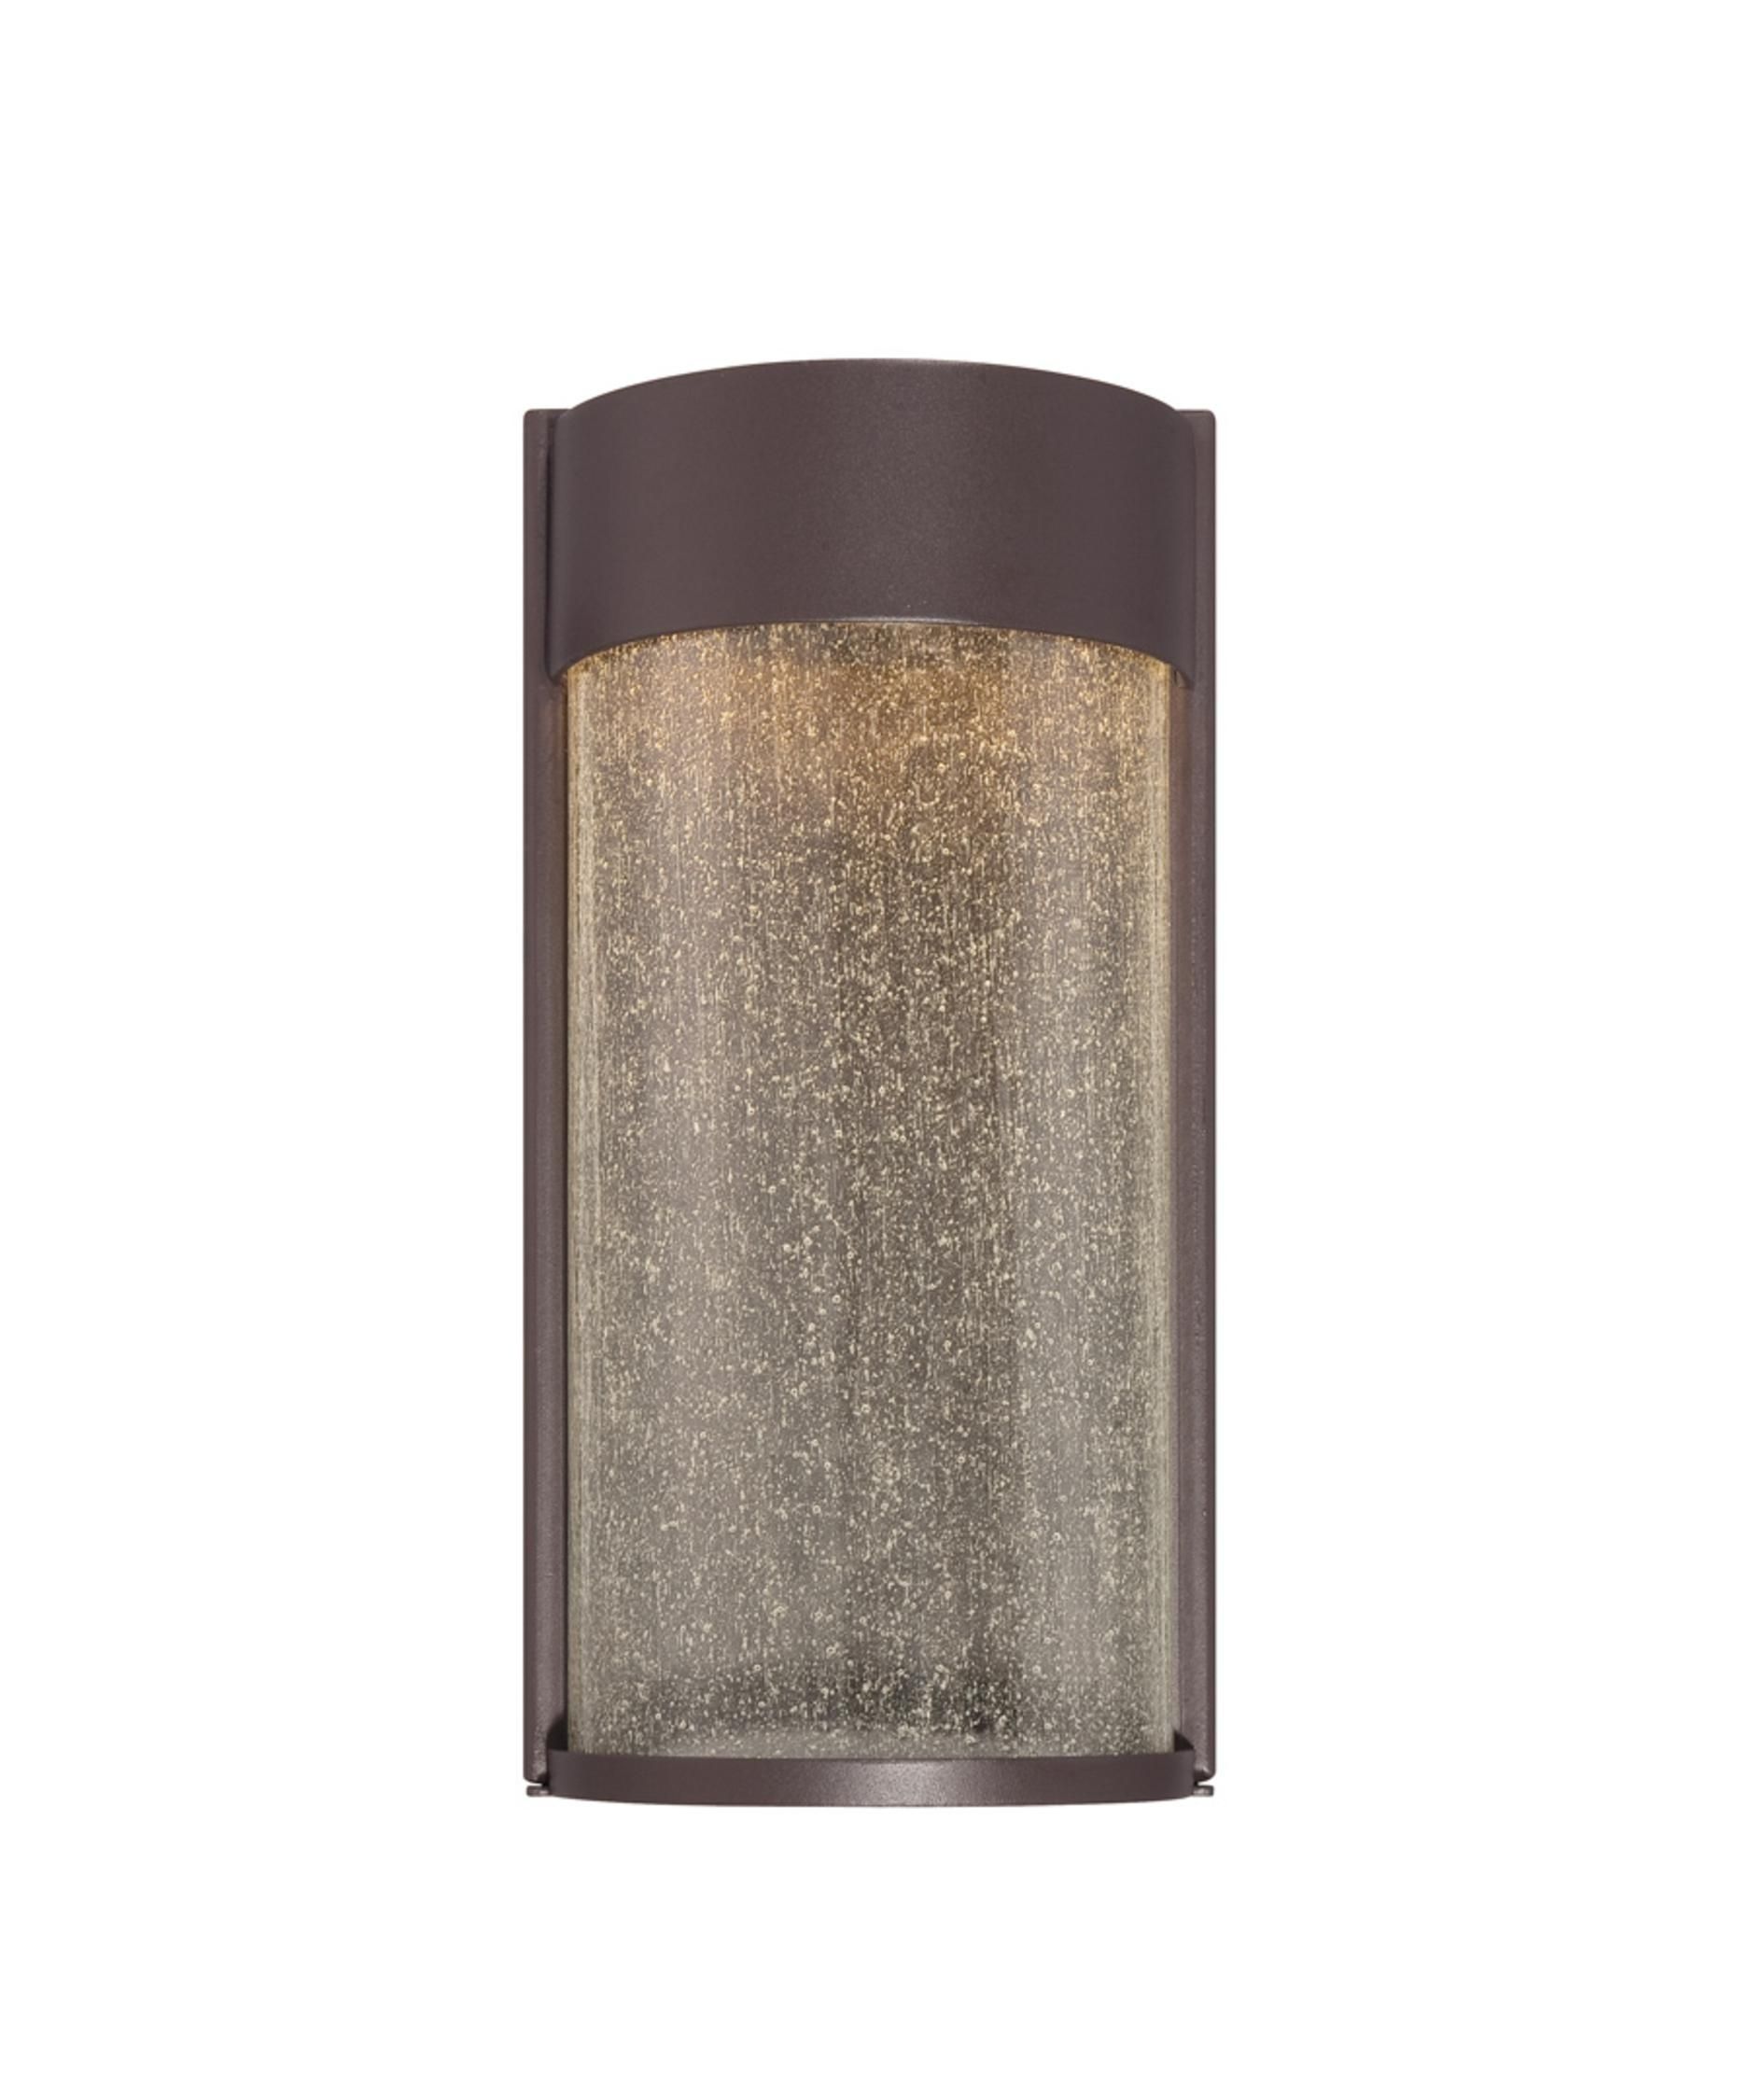 Furniture : Modern Forms Rain Inch Wide Light Outdoor Wall Led In Singapore Outdoor Wall Lighting (View 11 of 15)